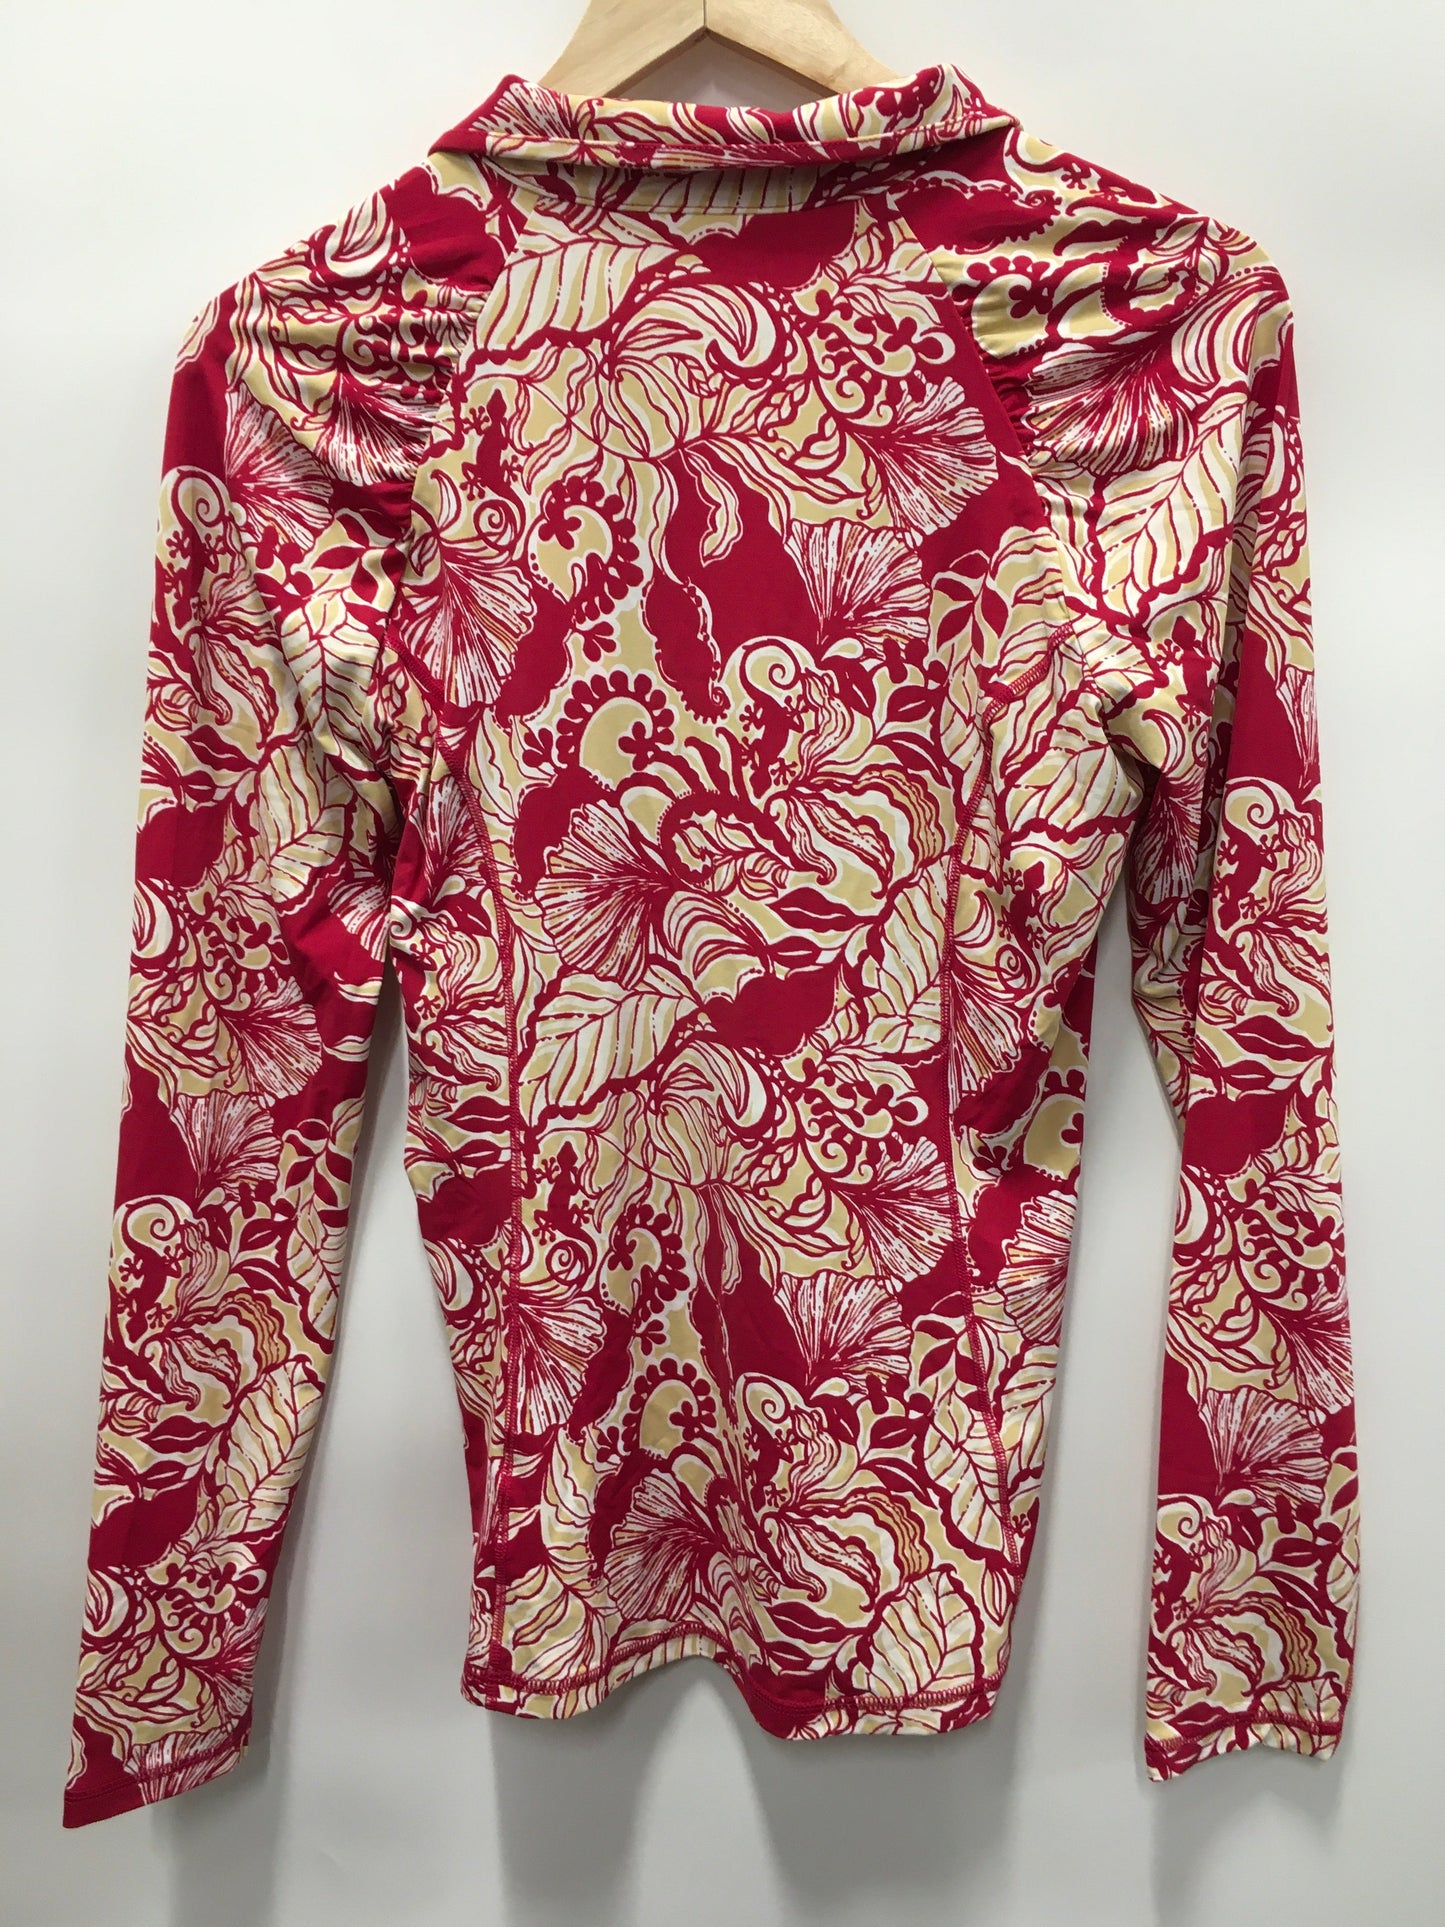 Athletic Top Long Sleeve Collar By Lilly Pulitzer  Size: M